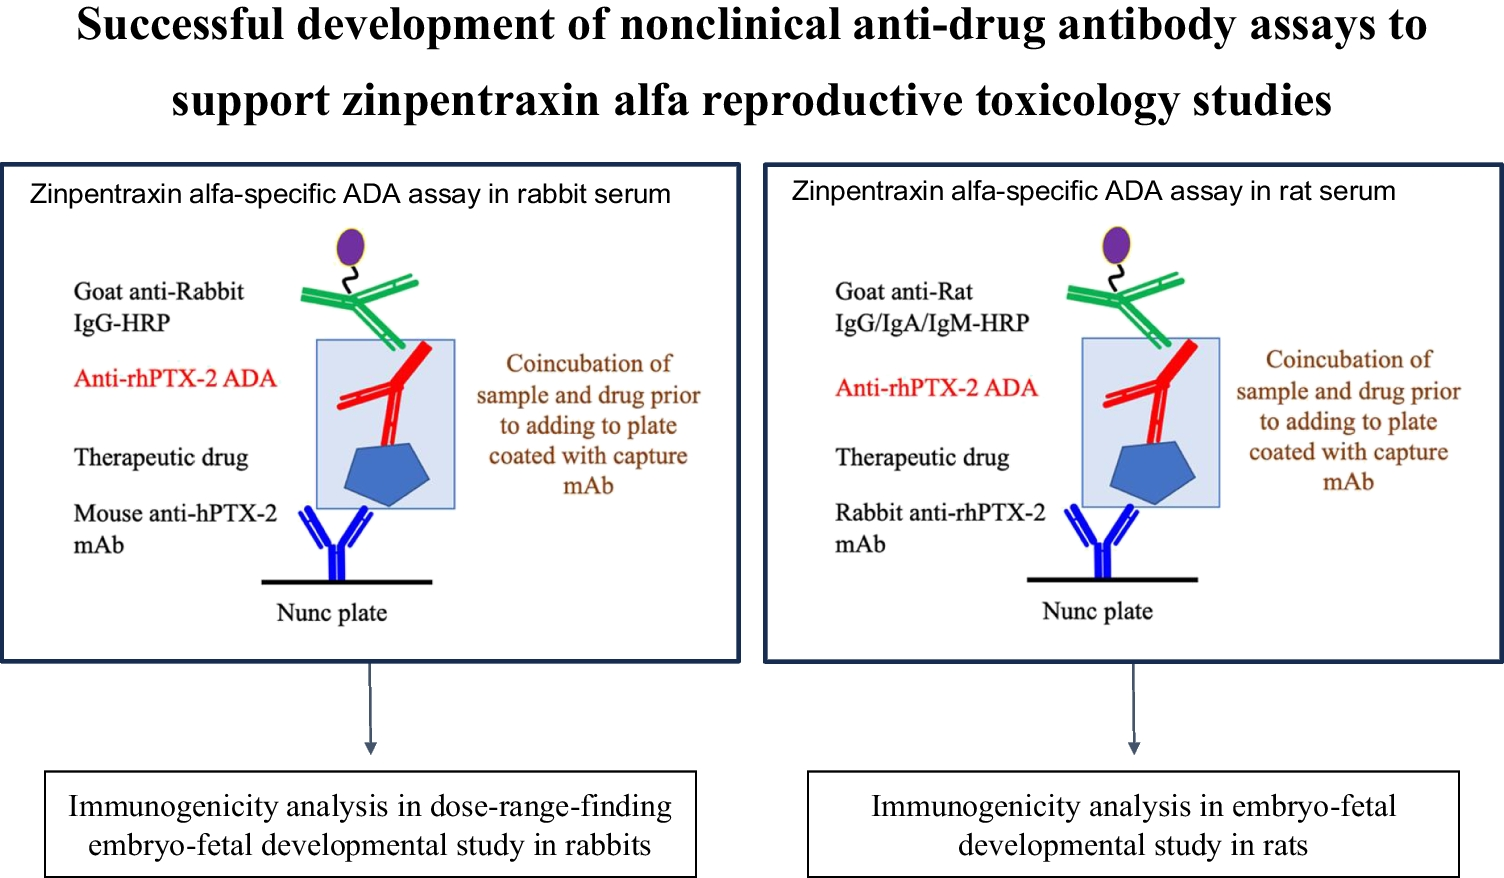 Successful Development of Nonclinical Anti-Drug Antibody Assays to Support Zinpentraxin Alfa Reproductive Toxicology Studies